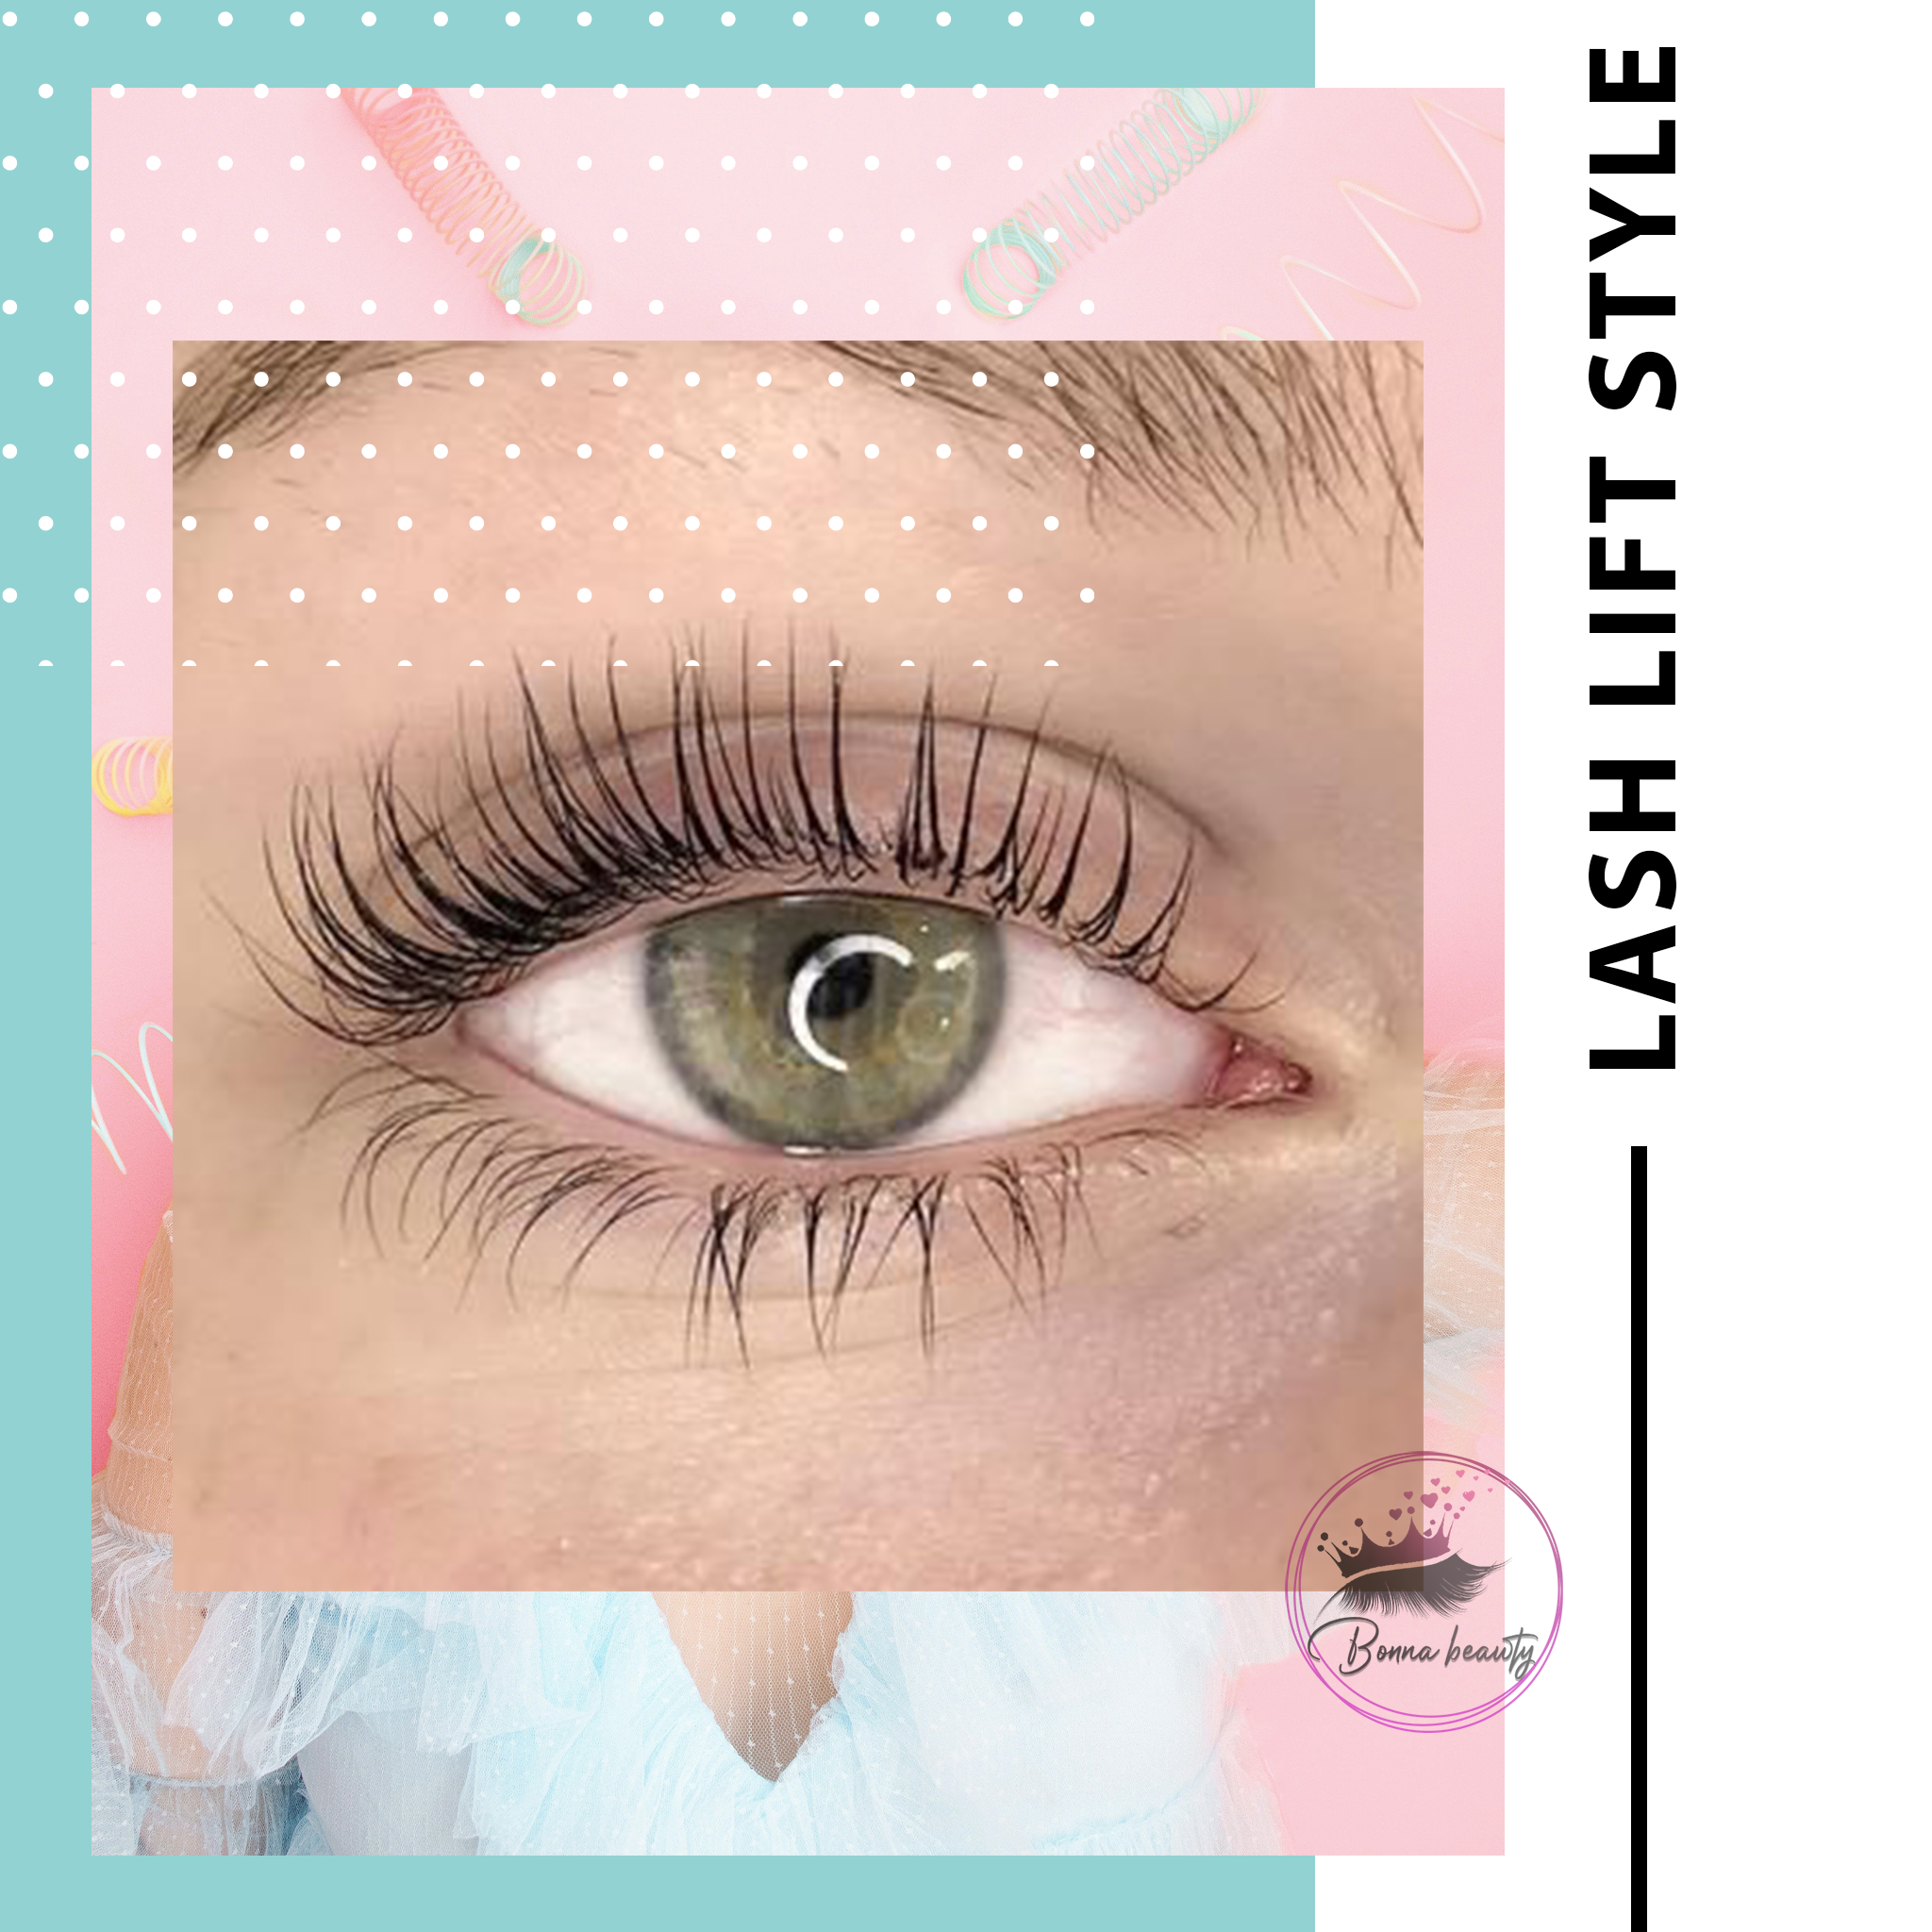 Lash Lift in Bankstown and Sydney